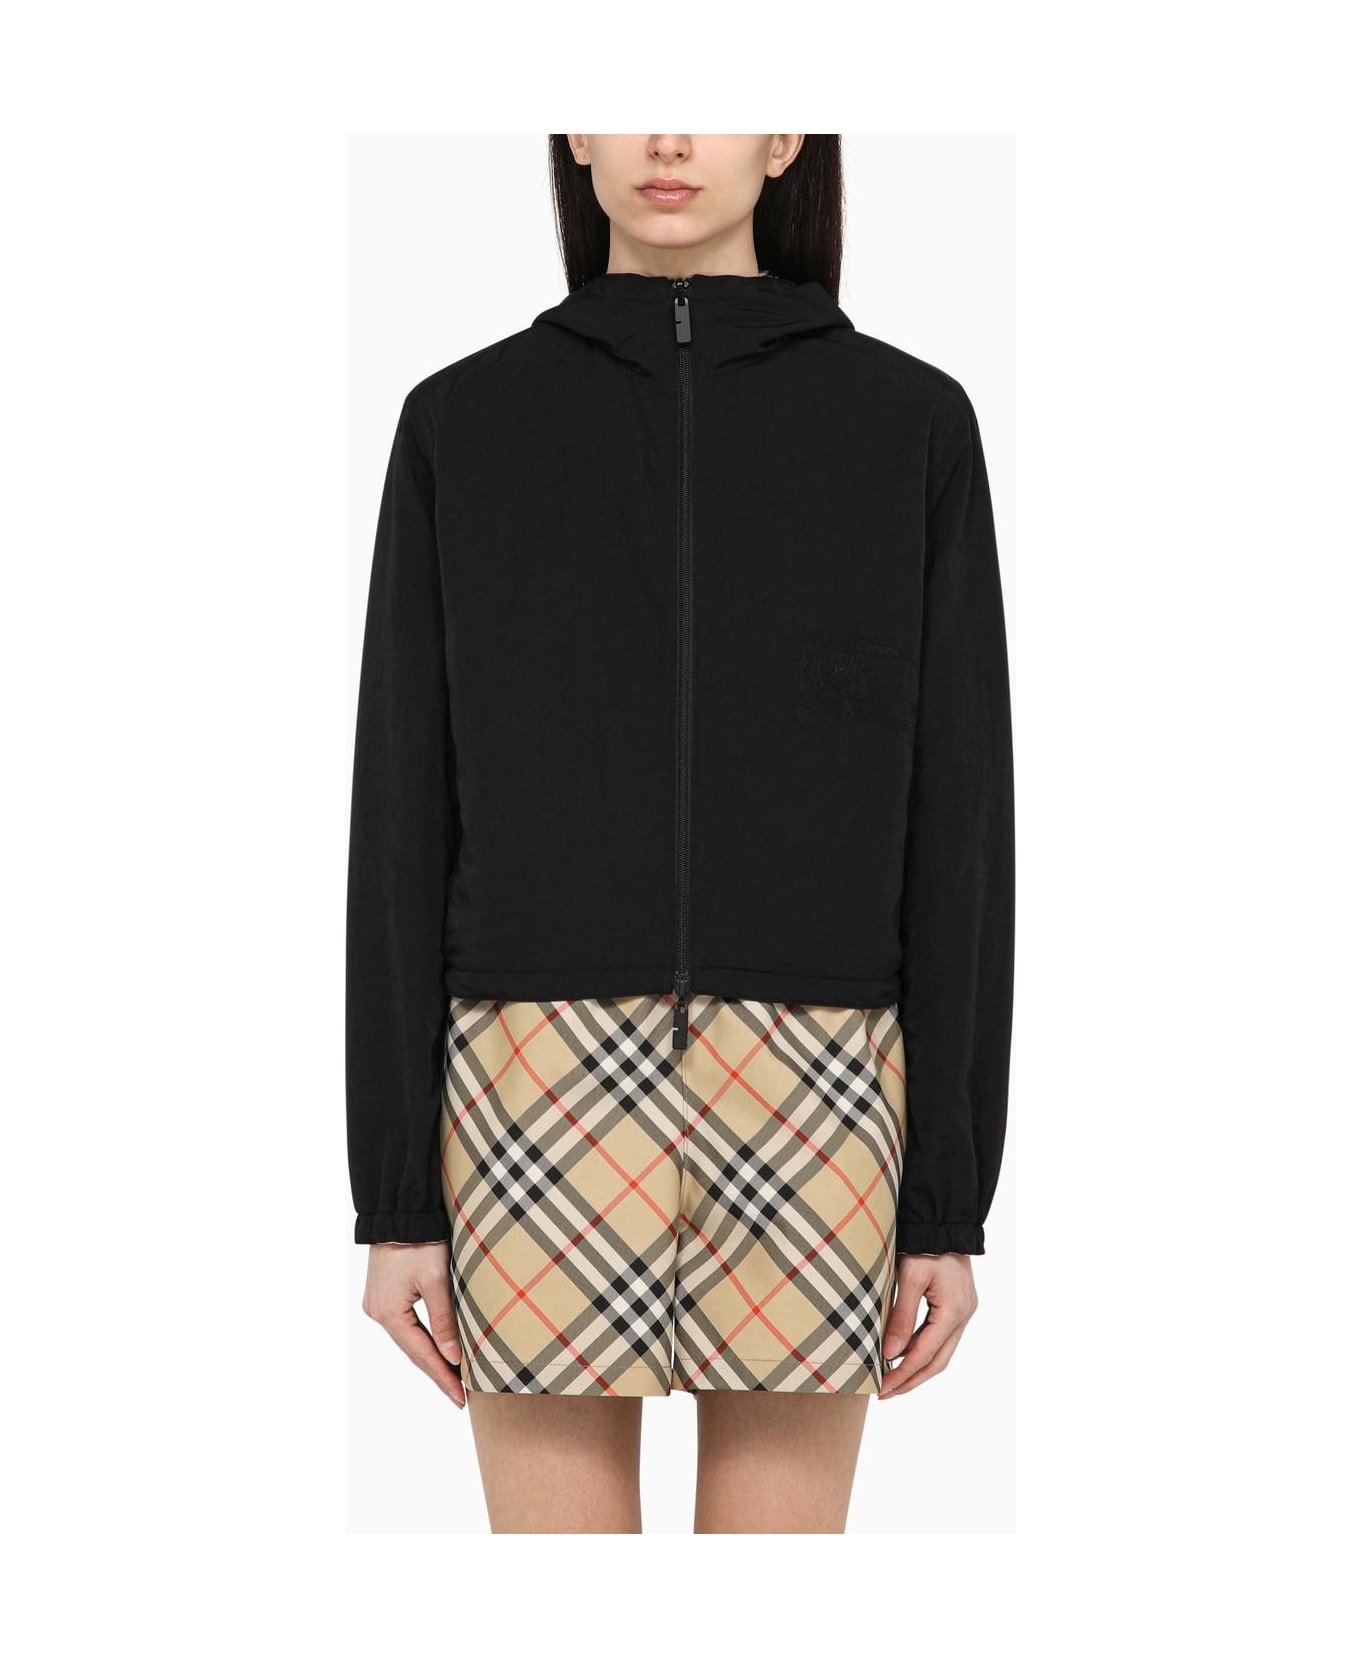 Burberry Reversible Sand-coloured Cropped Jacket With Check Pattern - BROWN/BLACK